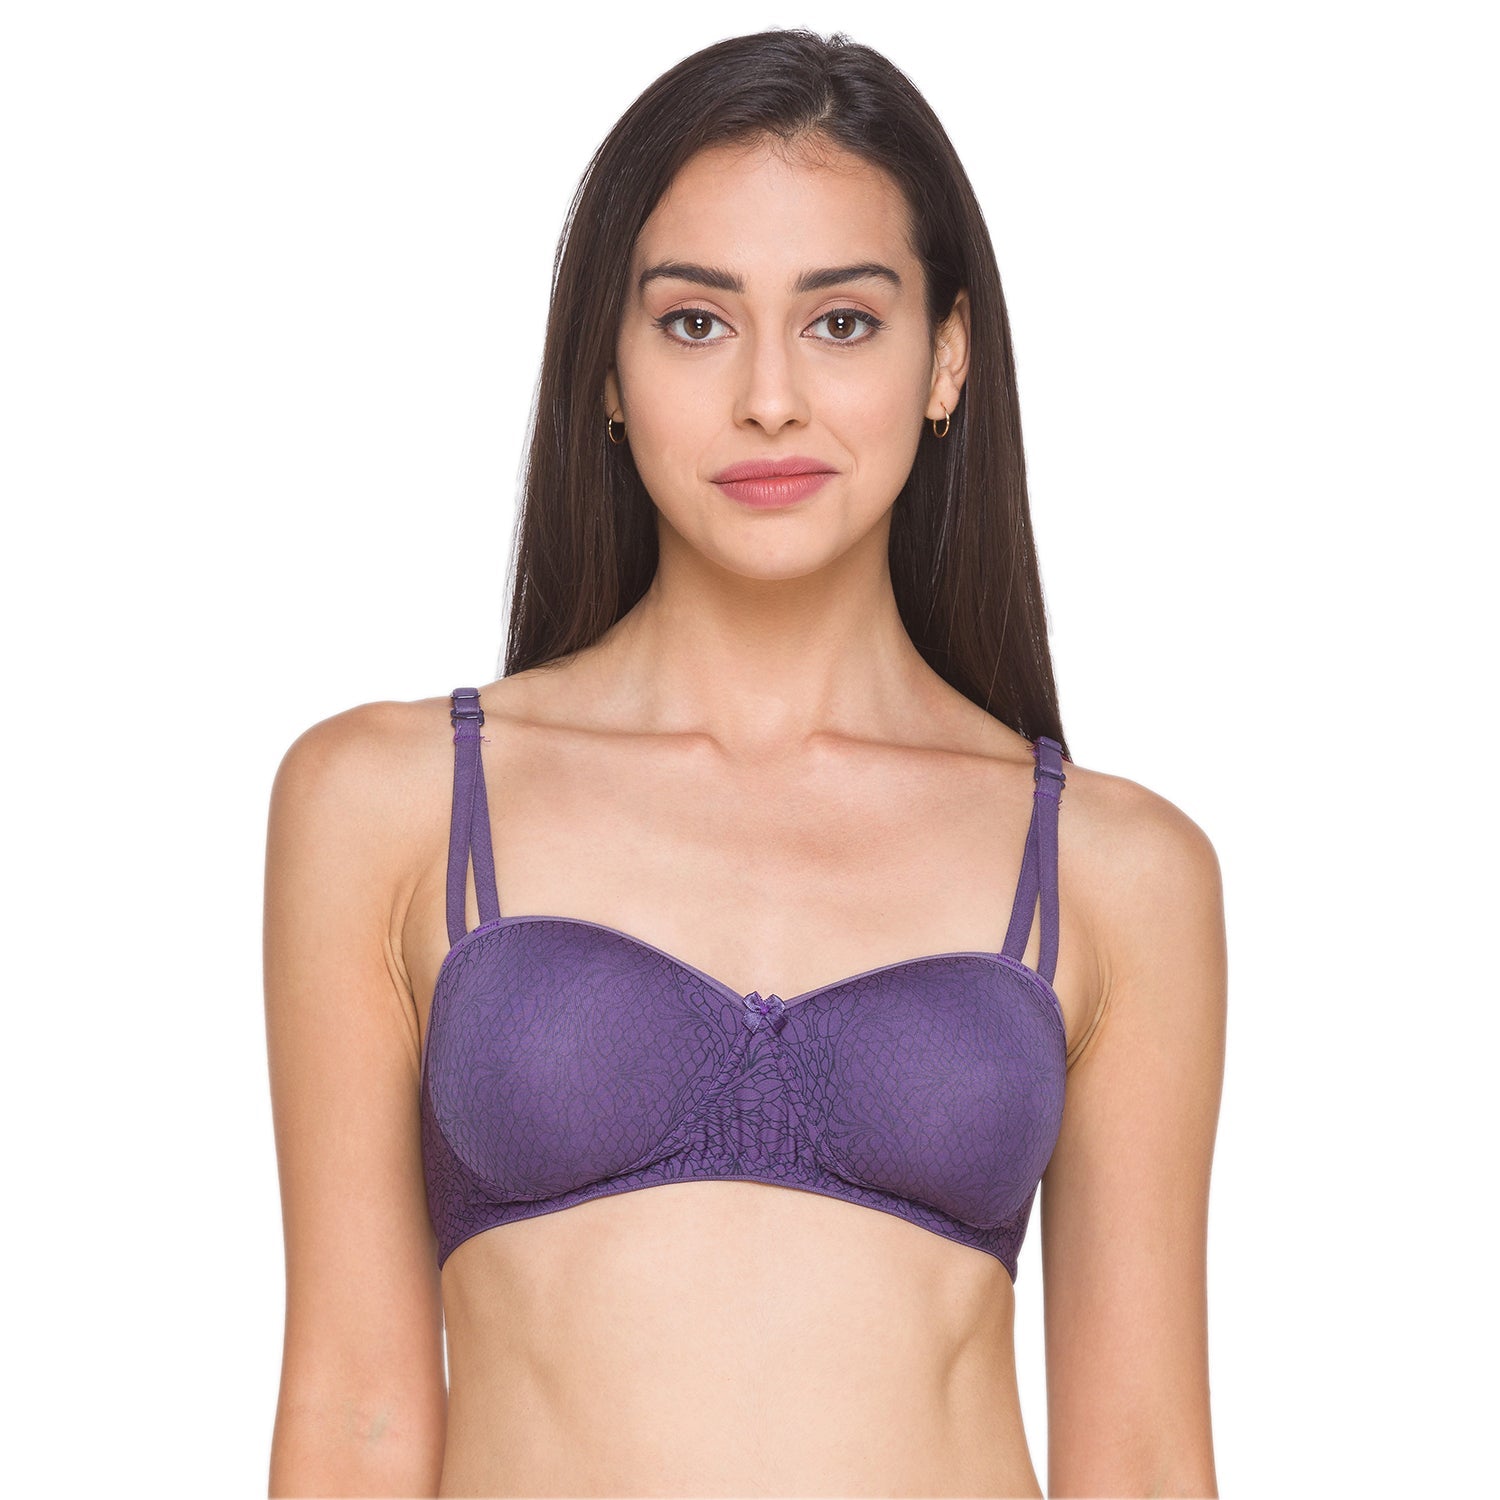 Buy Candyskin Comfort Cotton Bra - Lightly Padded, Non-Wired